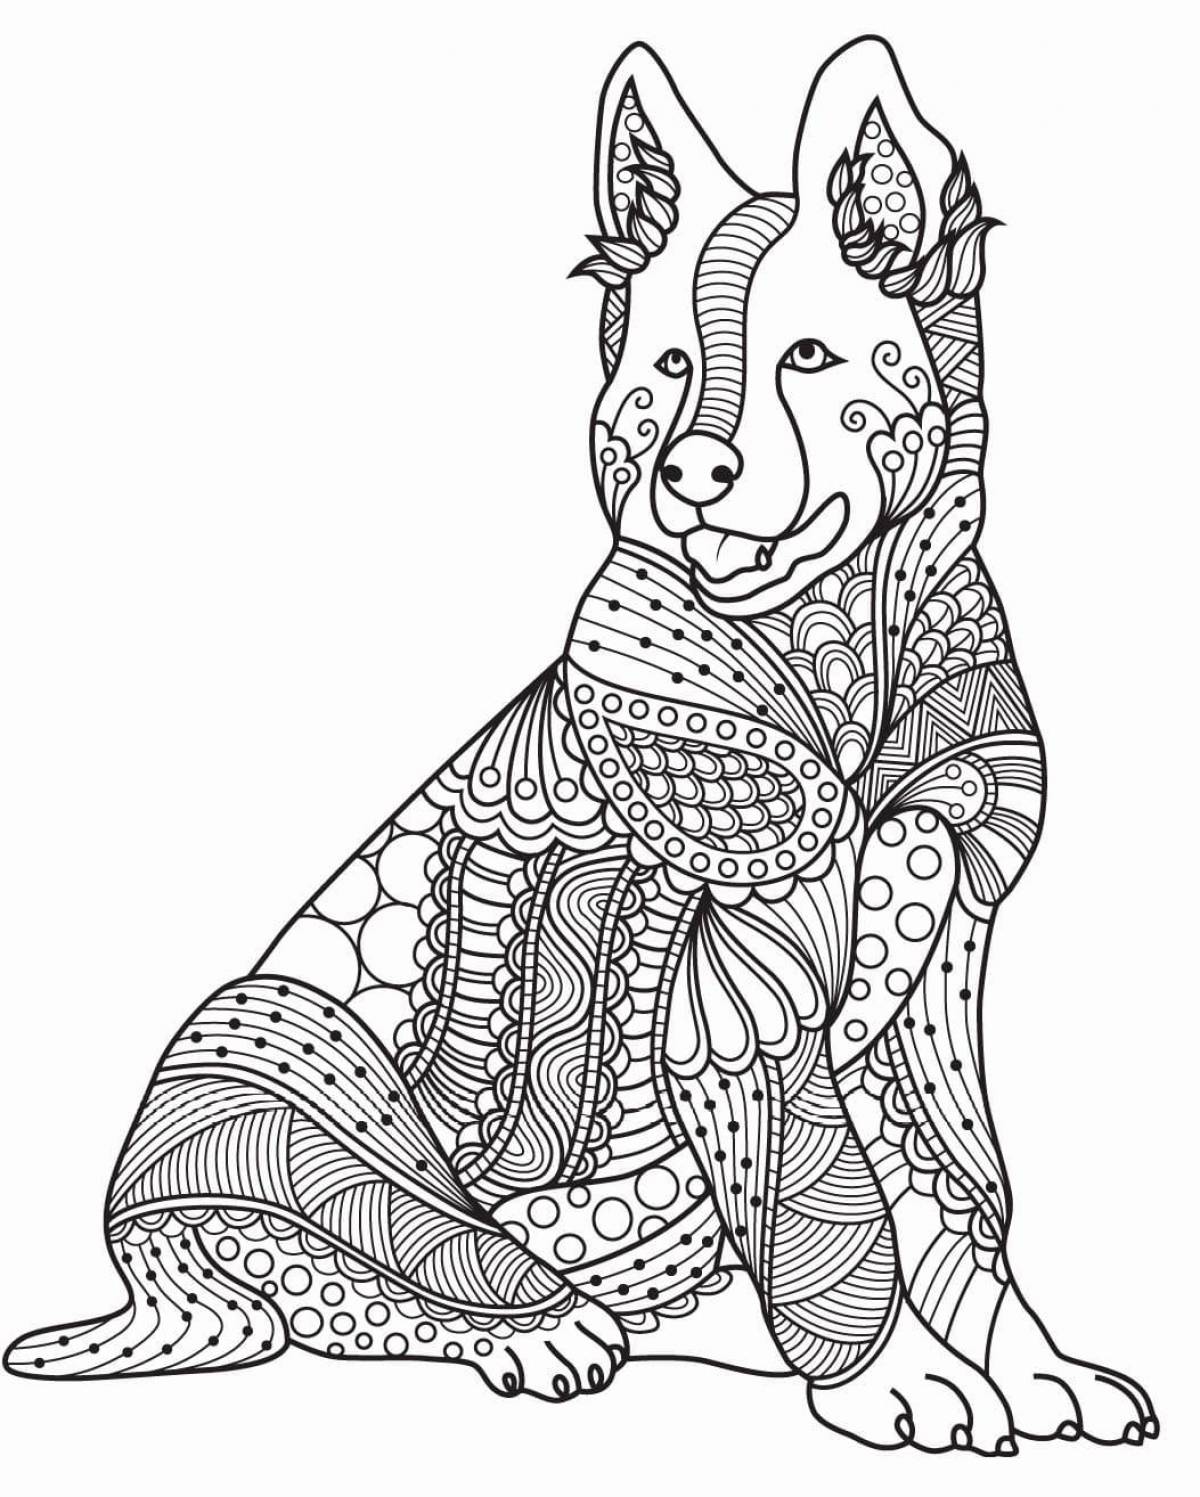 Coloring pages with complex animals